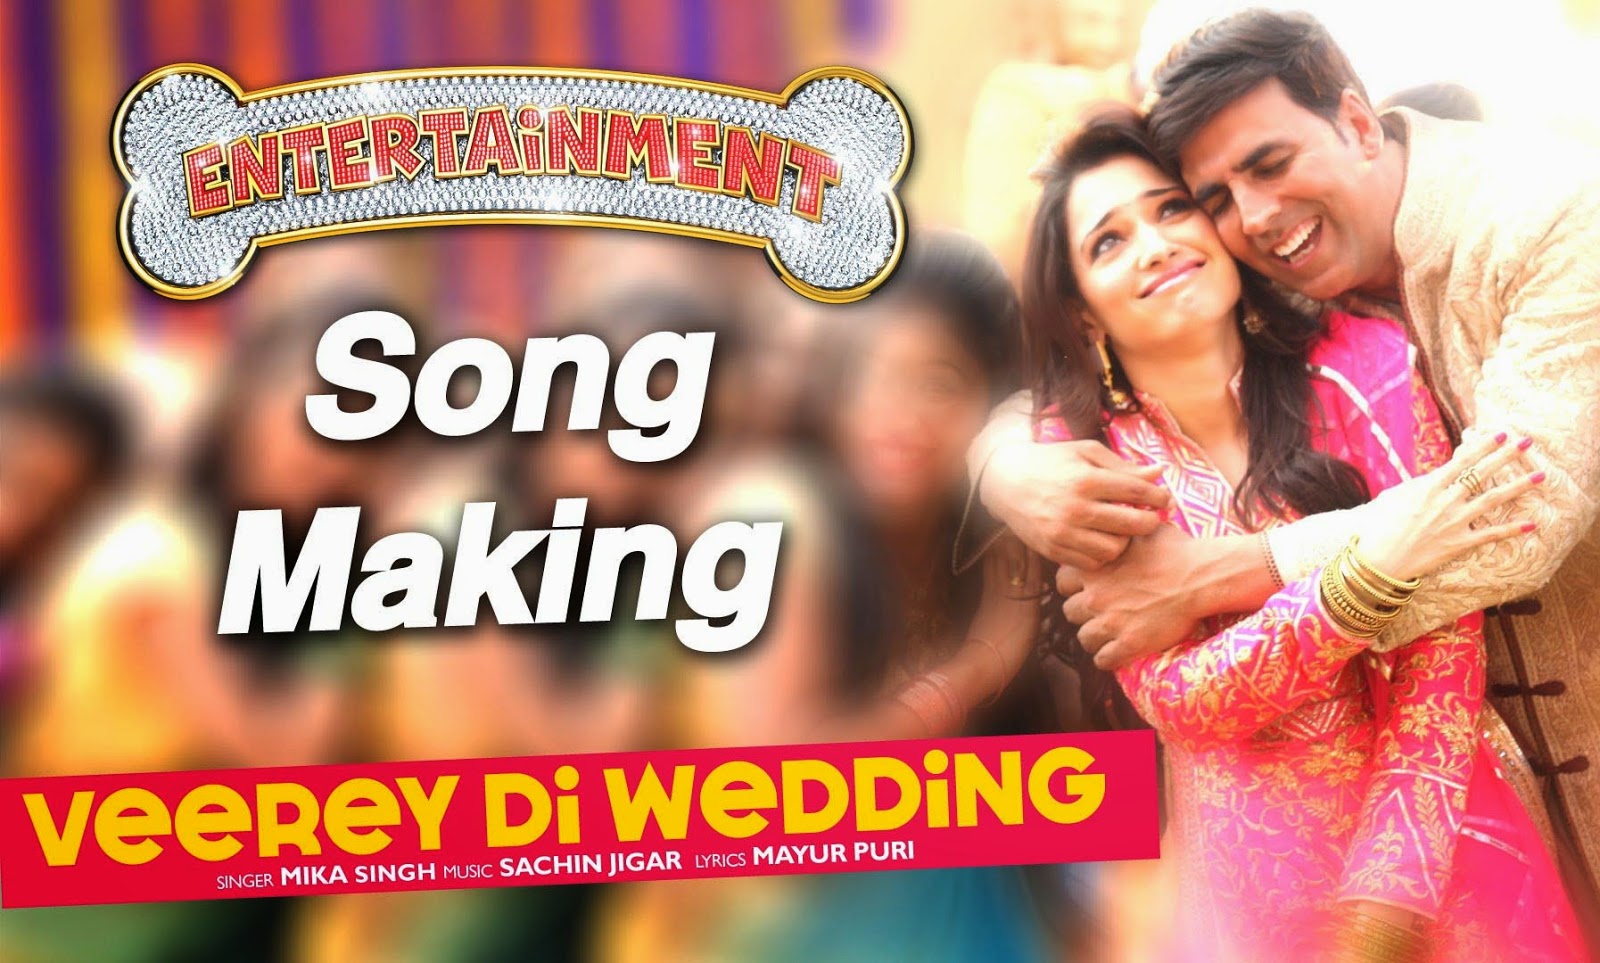   Veerey Di Wedding hd Video Song (Making) – It’s Entertainment (2014) 1080p,Veerey Di Wedding – Its Entertainment (2014) Video Song 1080p.Mp4,Veerey Di Wedding – Its Entertainment Video 720p,Veerey Di Wedding – Its Entertainment 1080p, Veerey Di Wedding – Its Entertainment Hd Video, Veerey Di Wedding – Its Entertainment Video.mp4,Veerey Di Wedding Hindi Video Song, Veerey Di Wedding HD Video, Veerey Di Wedding full Video, Veerey Di Wedding 1080p Video.mp4 Download, Veerey Di Wedding fullsongspk24 Video Downlload, Veerey Di Wedding hd Video Song (Making).mp4